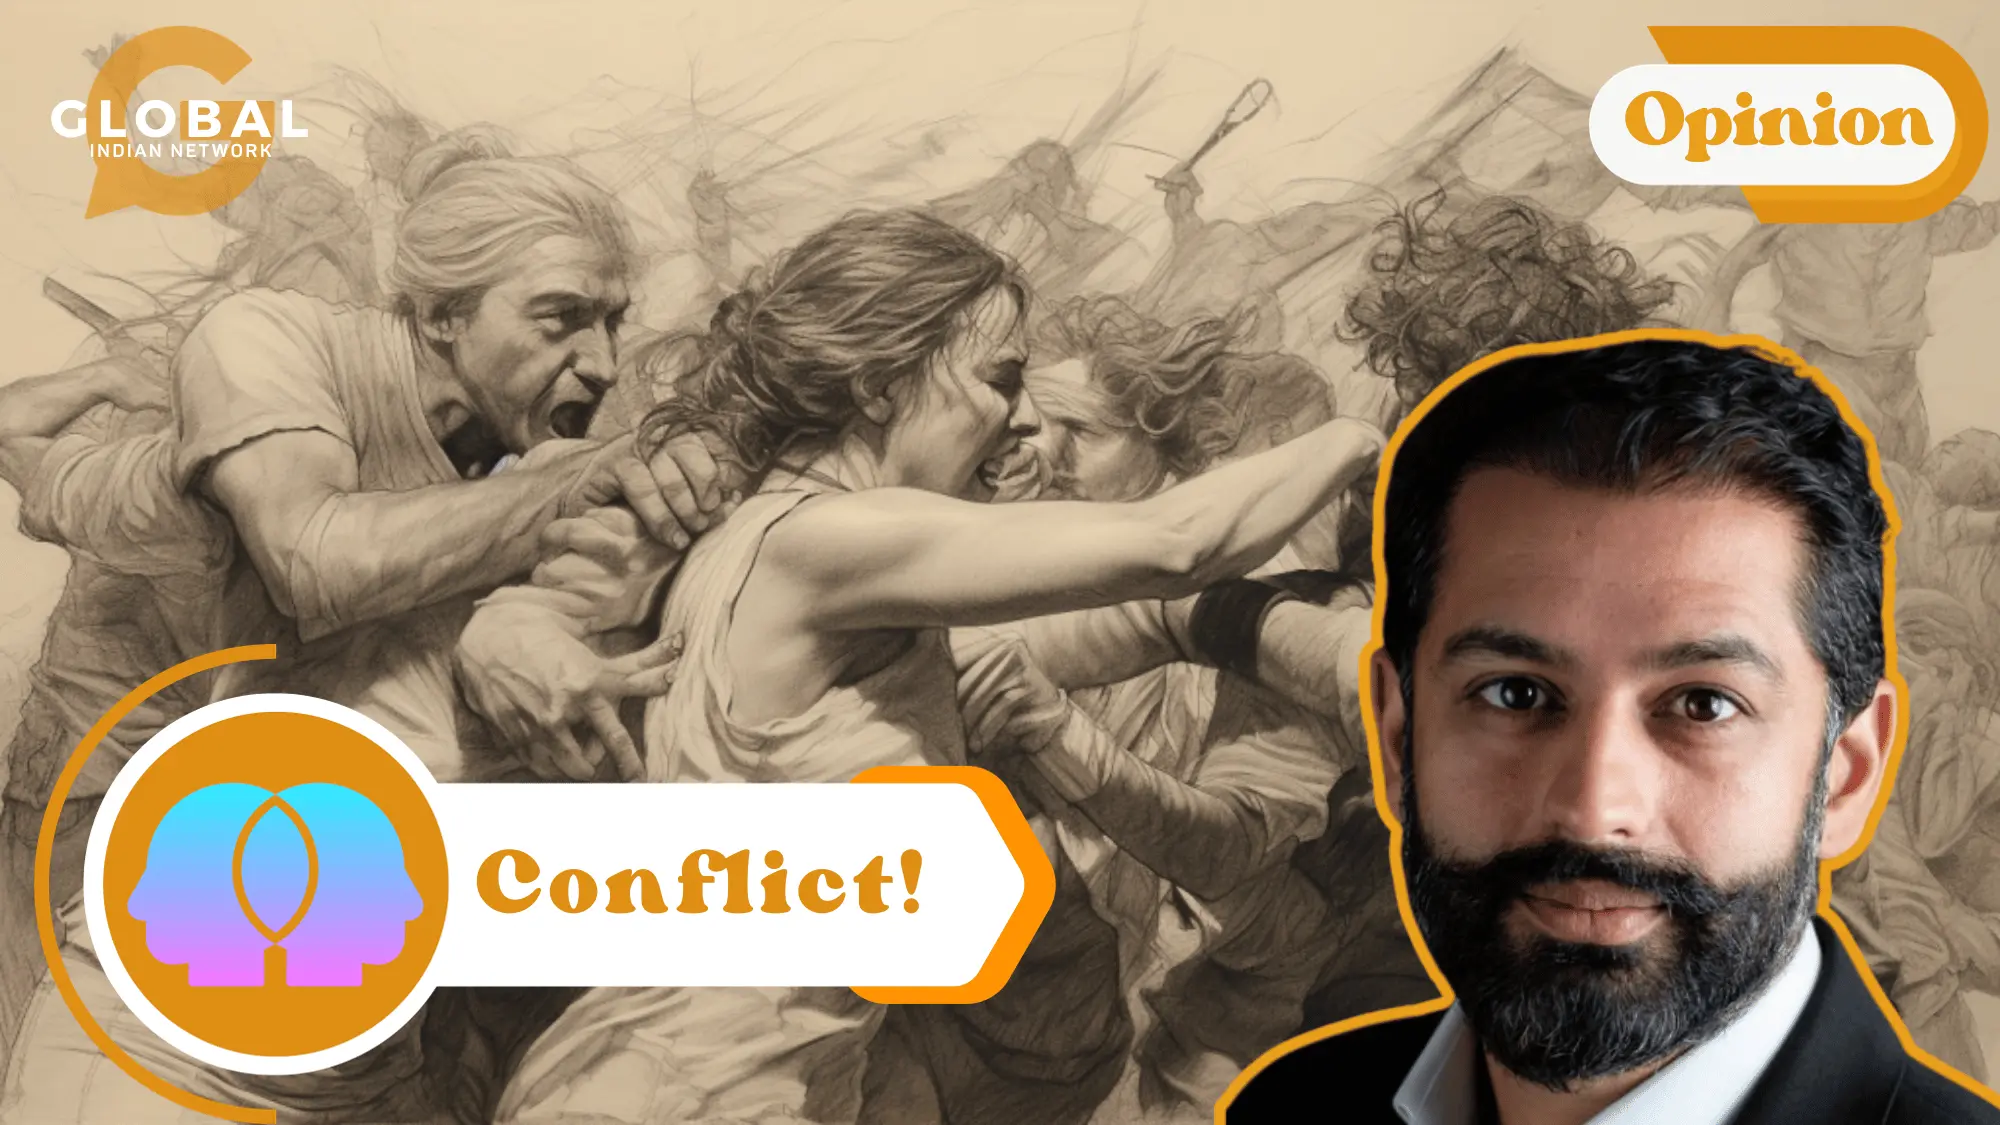 The Way We Look At Conflict